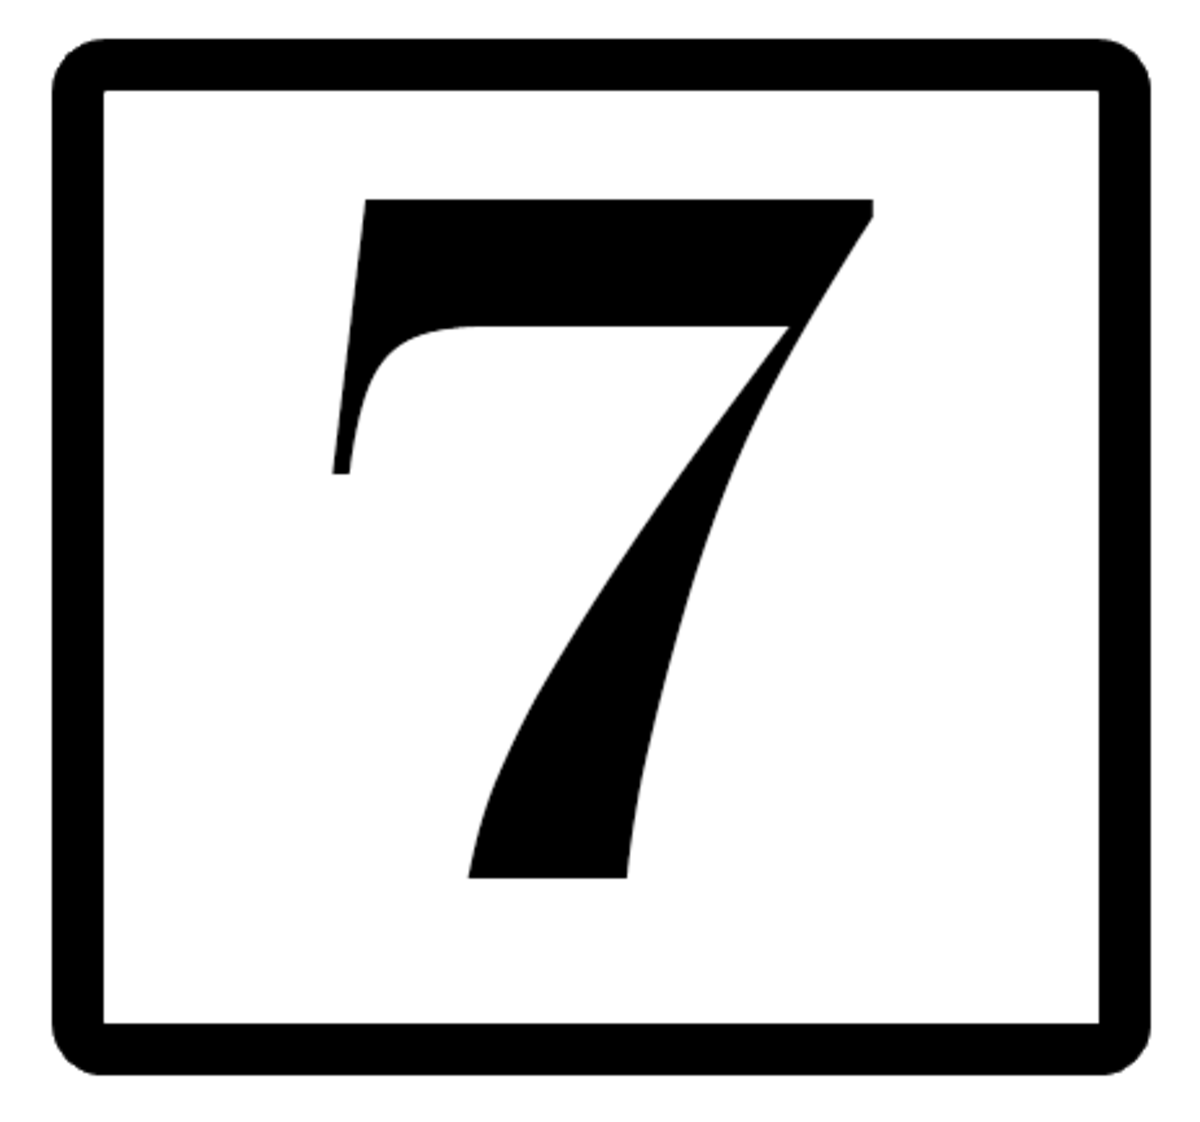 Lucky number 7 